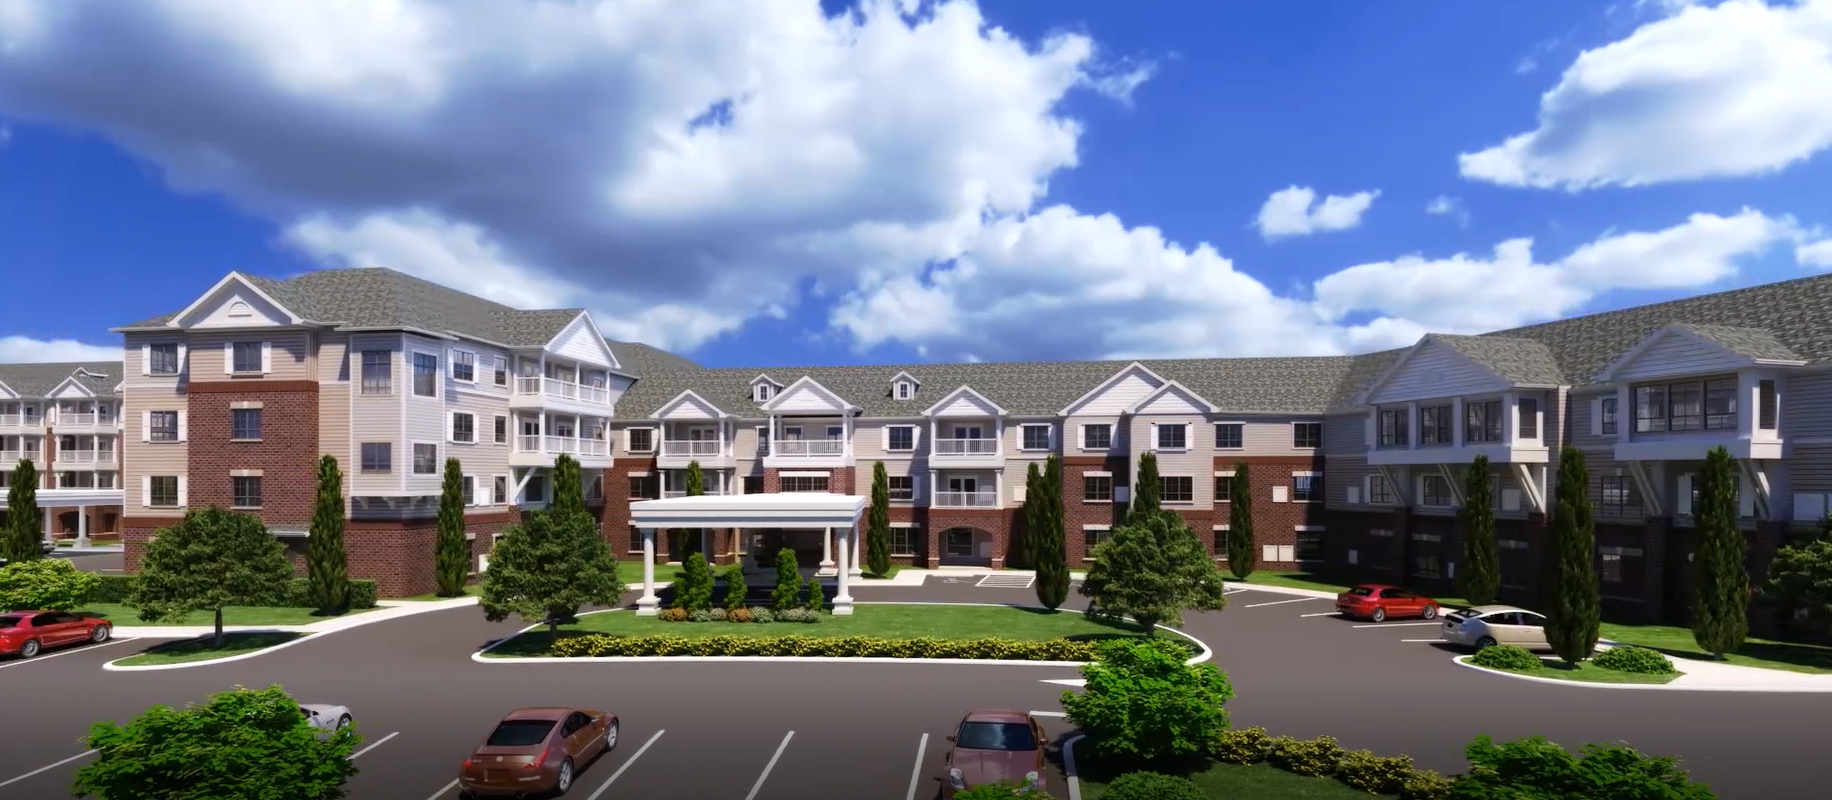 Senior Living in Bowie, MD